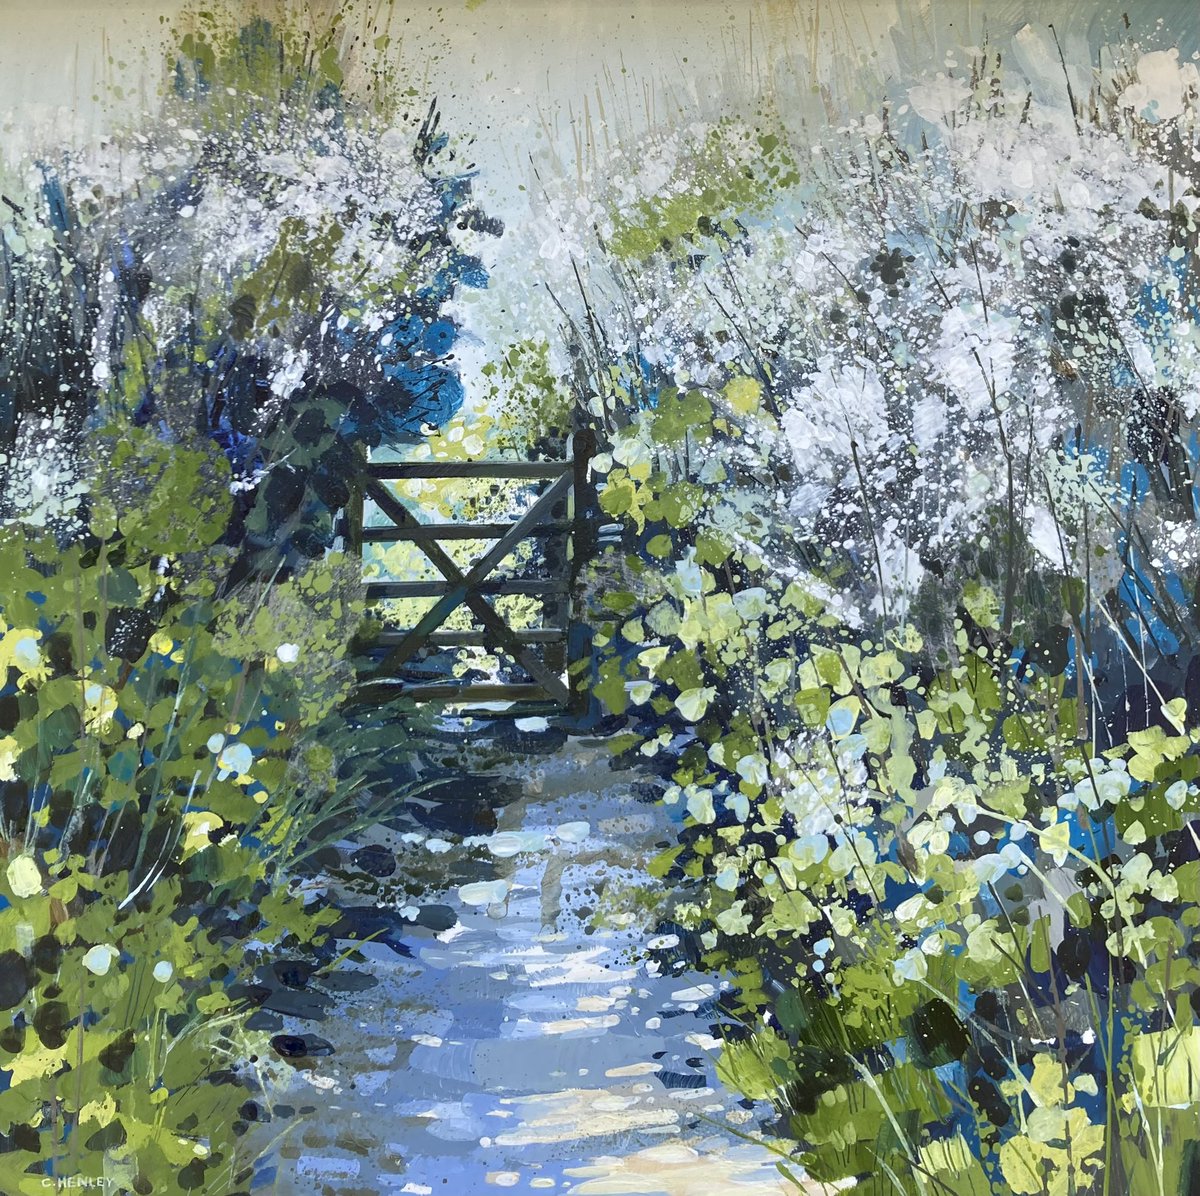 Hang on in there!
There are plenty of green shoots, the birds are getting louder & it won’t be long until the blackthorn blossom is out.

This painting will be off to @HarbourGallery on Sunday.
#portscatho #roselandpeninsula #coastpath

PS thanks for the inspiration, Joanna!